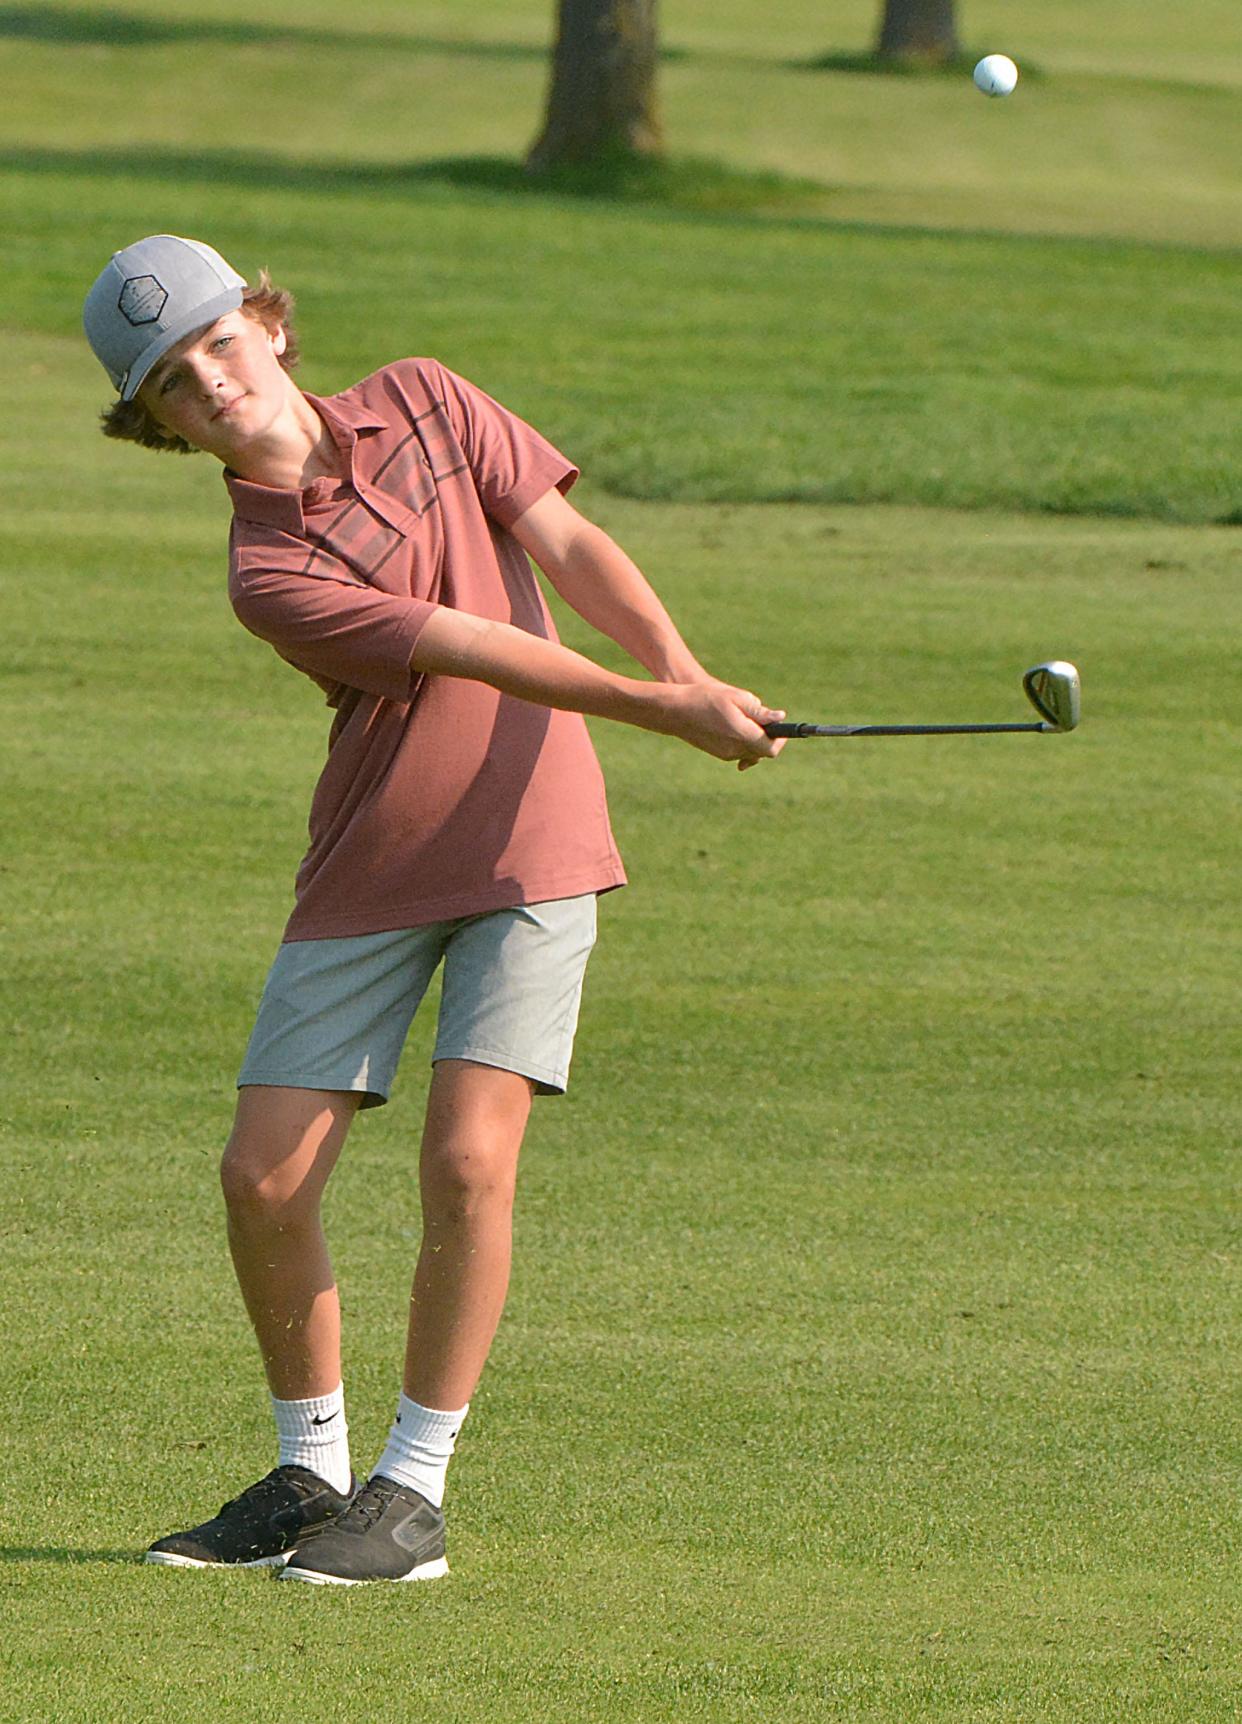 Riley Randall of Watertown (12-13 boys) hits to the No. 1 Red green during the South Dakota Golf Association Junior Tour stop on Tuesday, July 9, 2024 at Cattail Crossing Golf Course in Watertown.